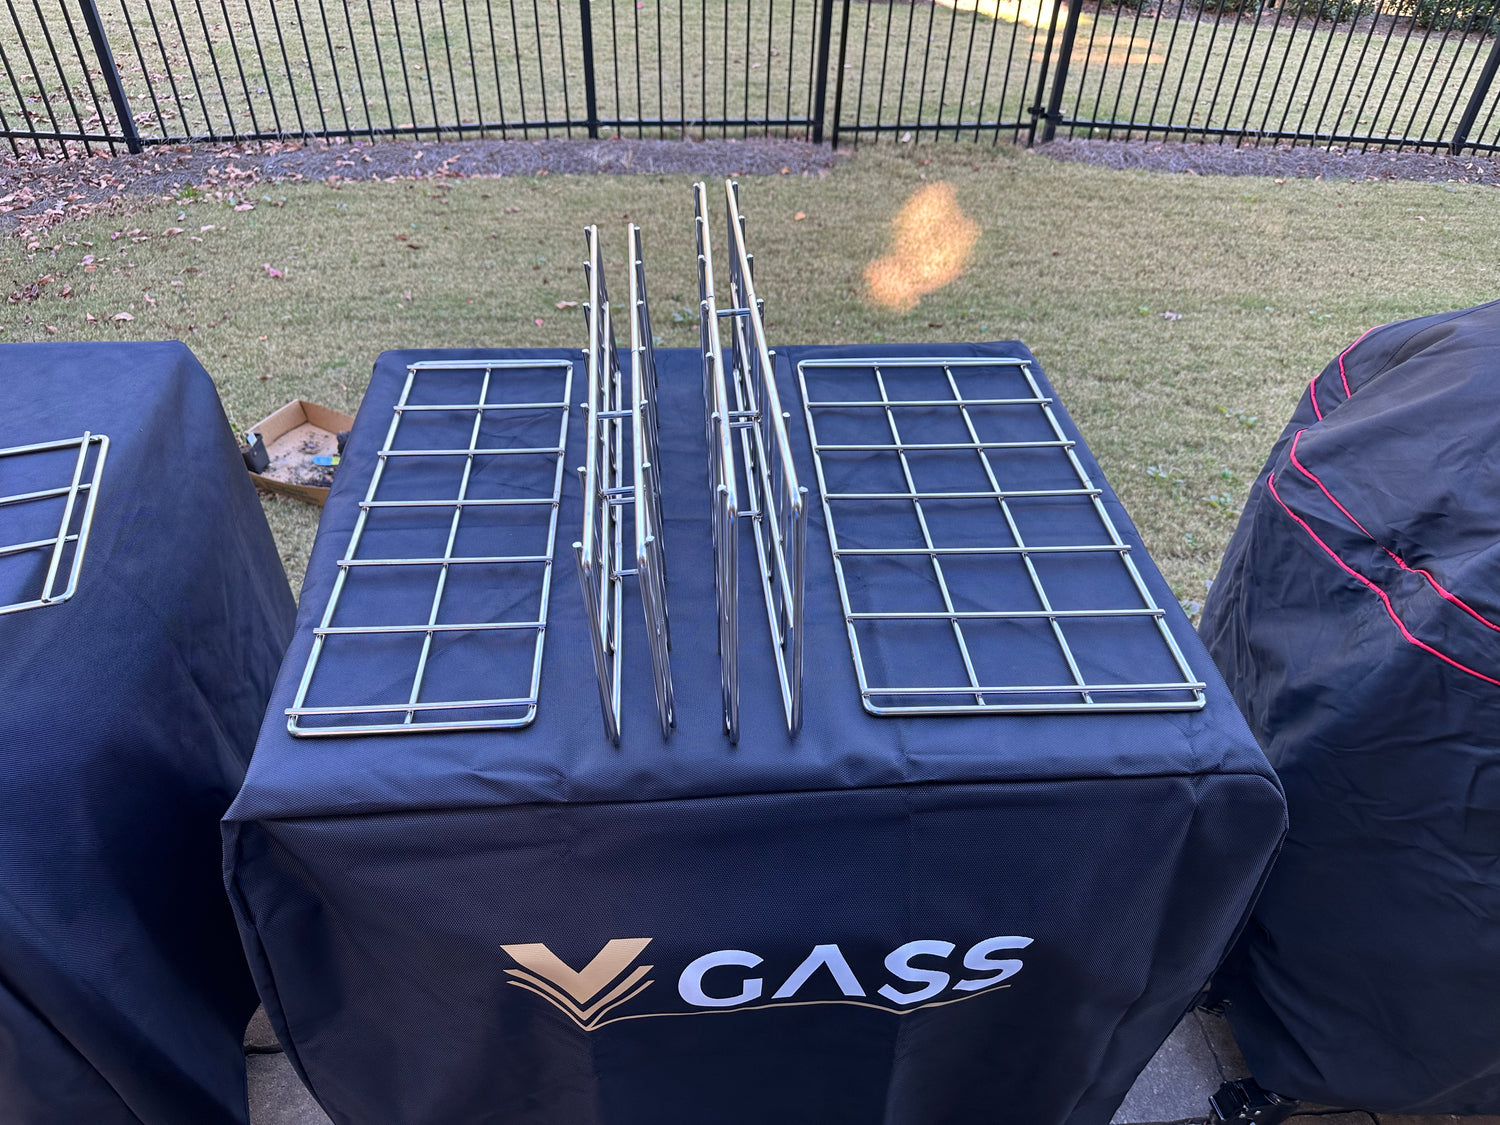 VGASS offers three sizes of the VGrates. 